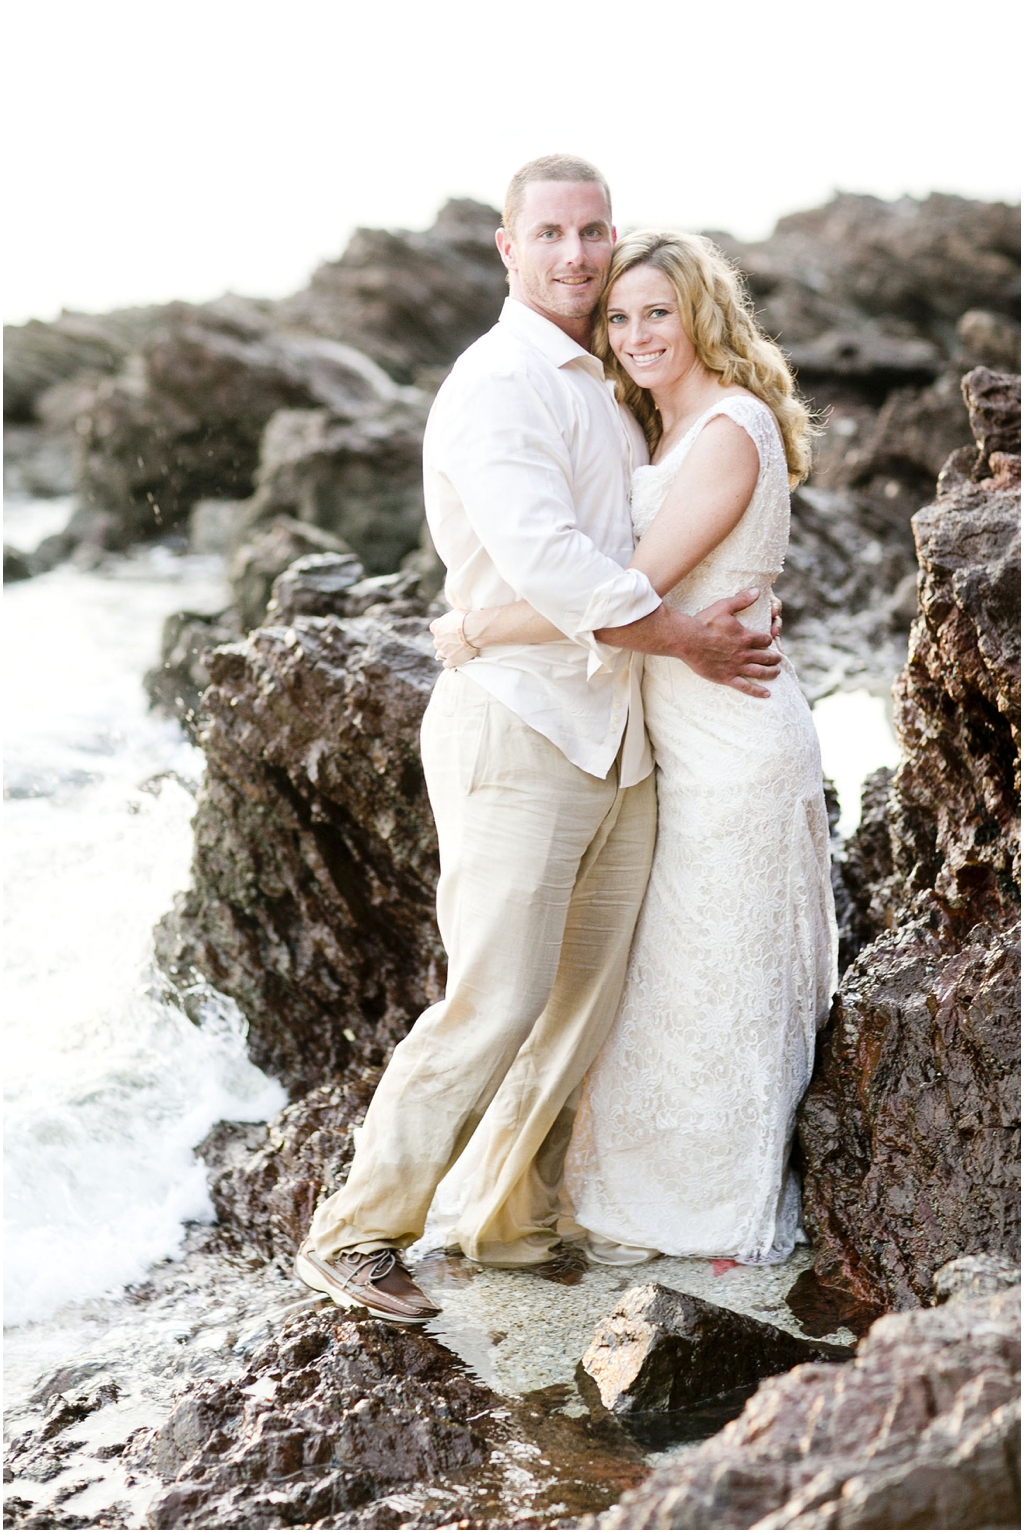 View More: http://maryfieldsphotography.pass.us/jackson-wedding-costarica